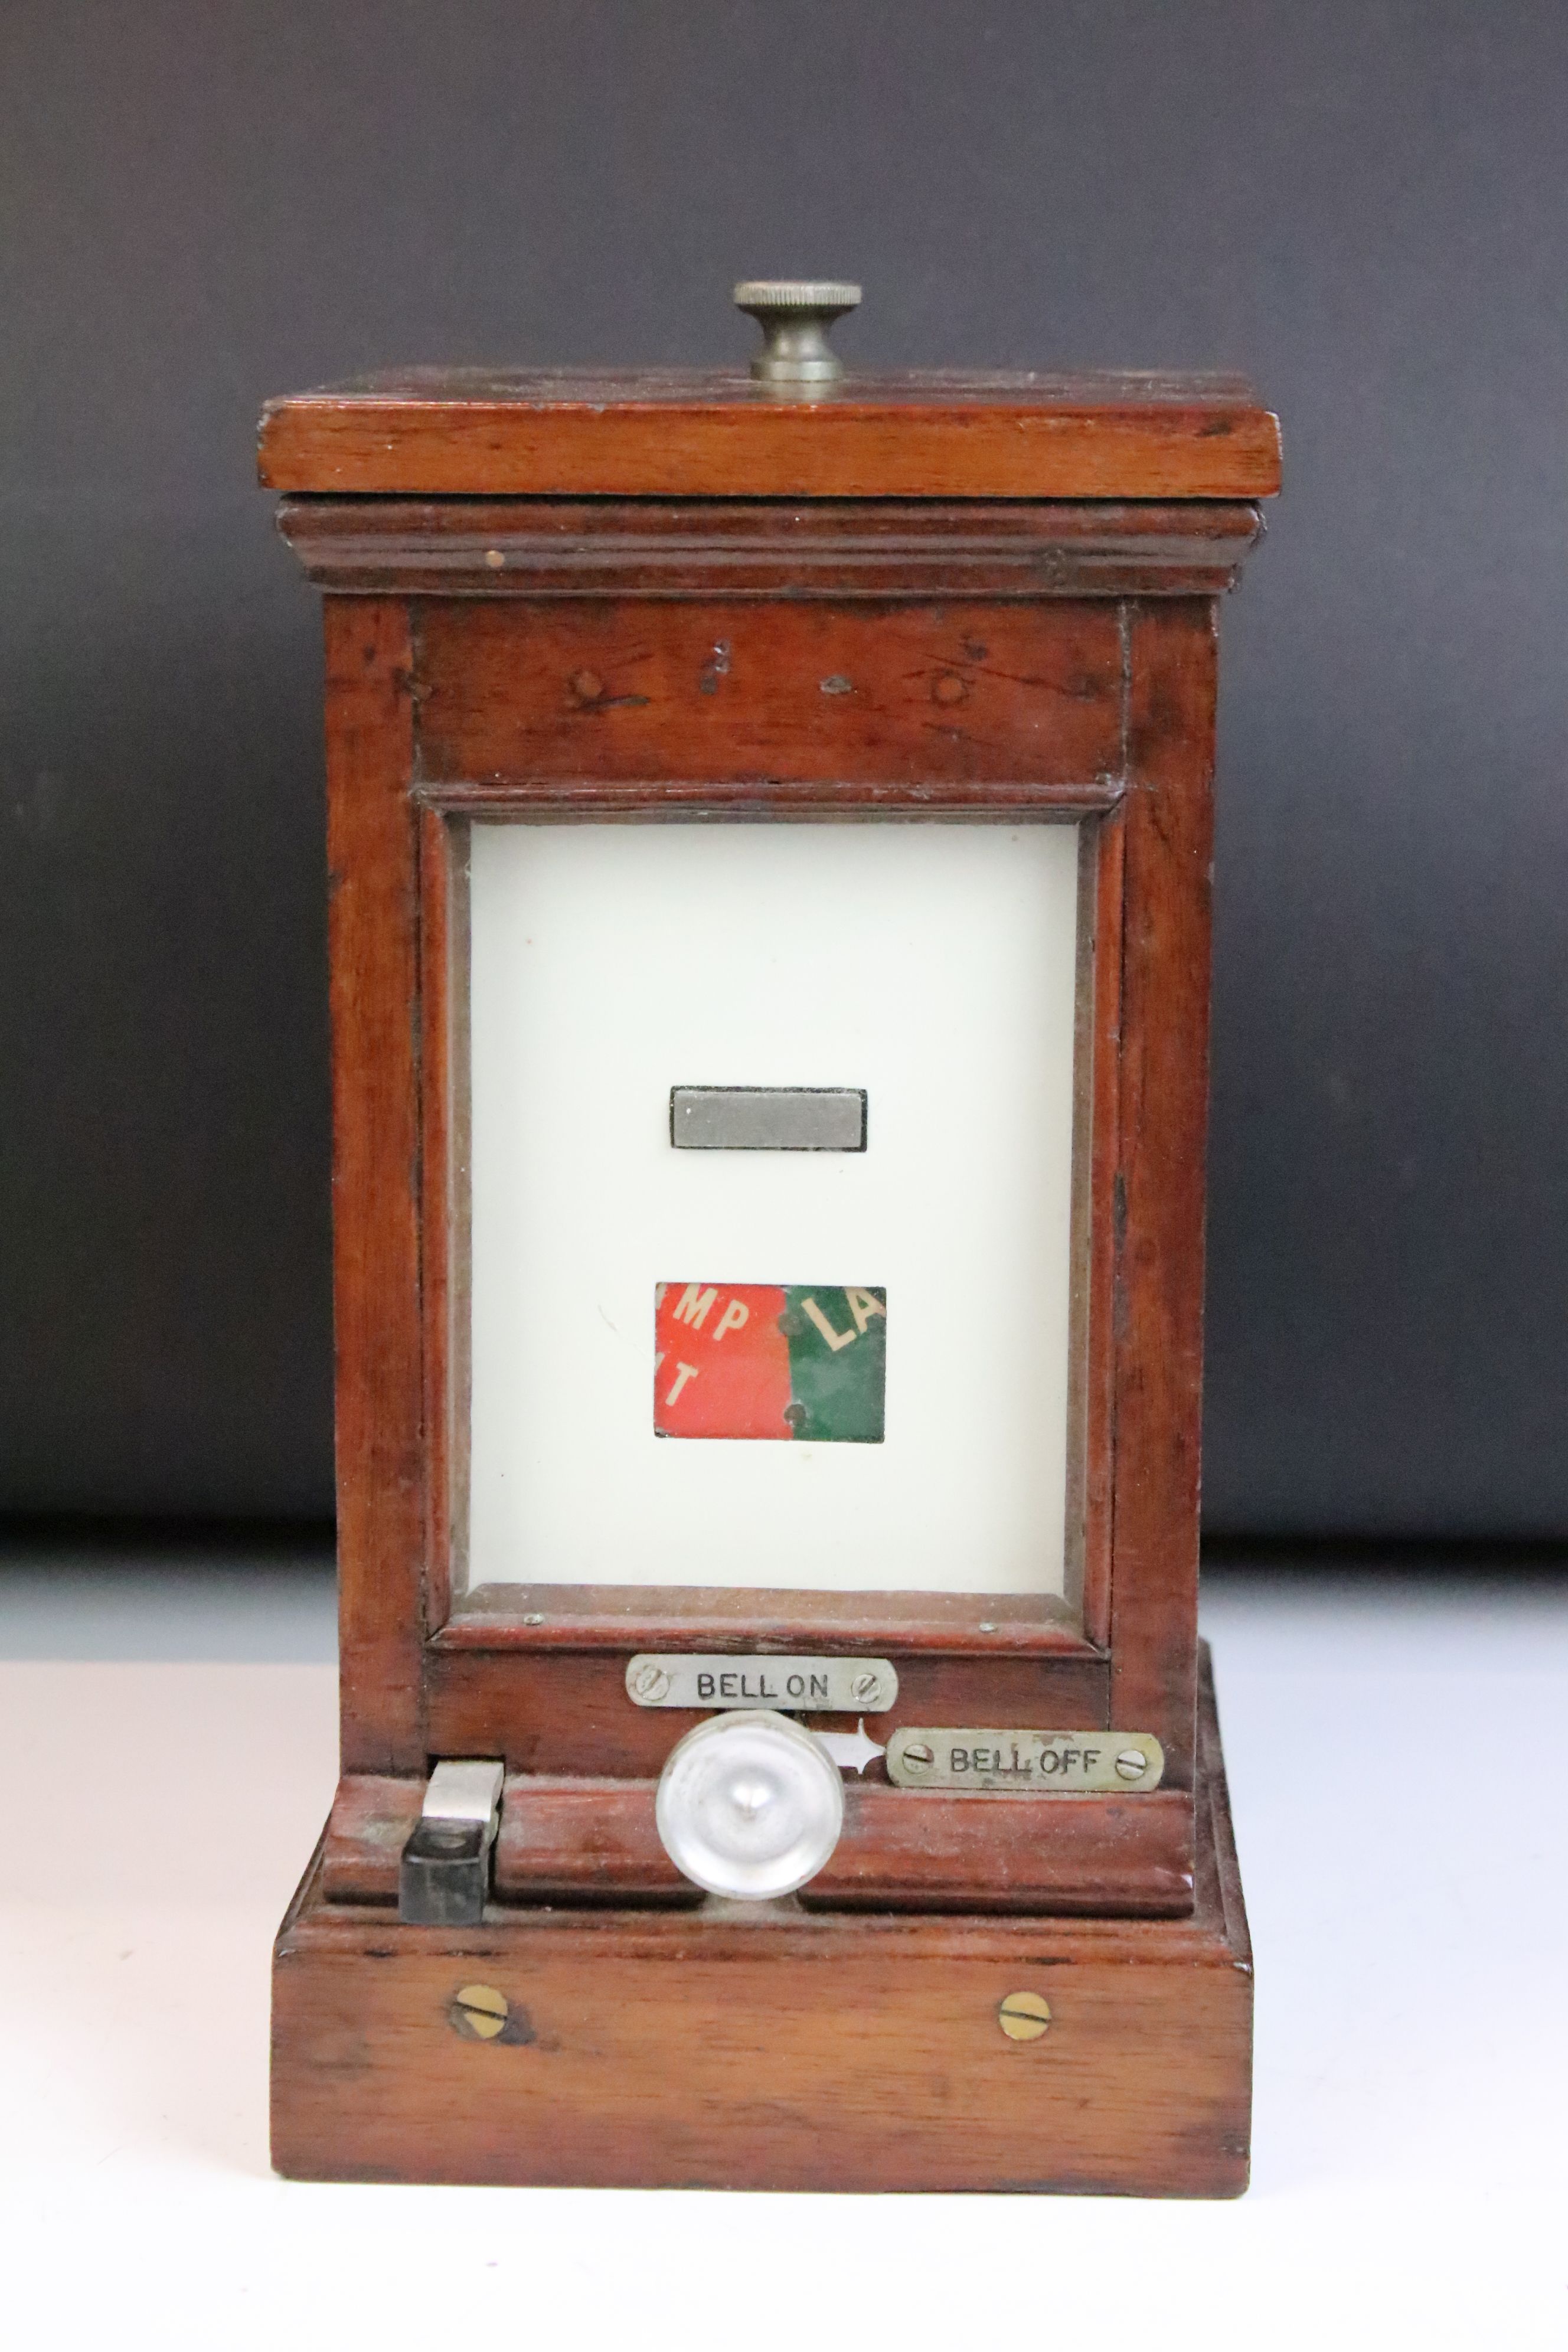 Railwayana - A Mid 20th C mahogany cased lamp repeater, with bell on/off switch. Measures approx - Image 2 of 5